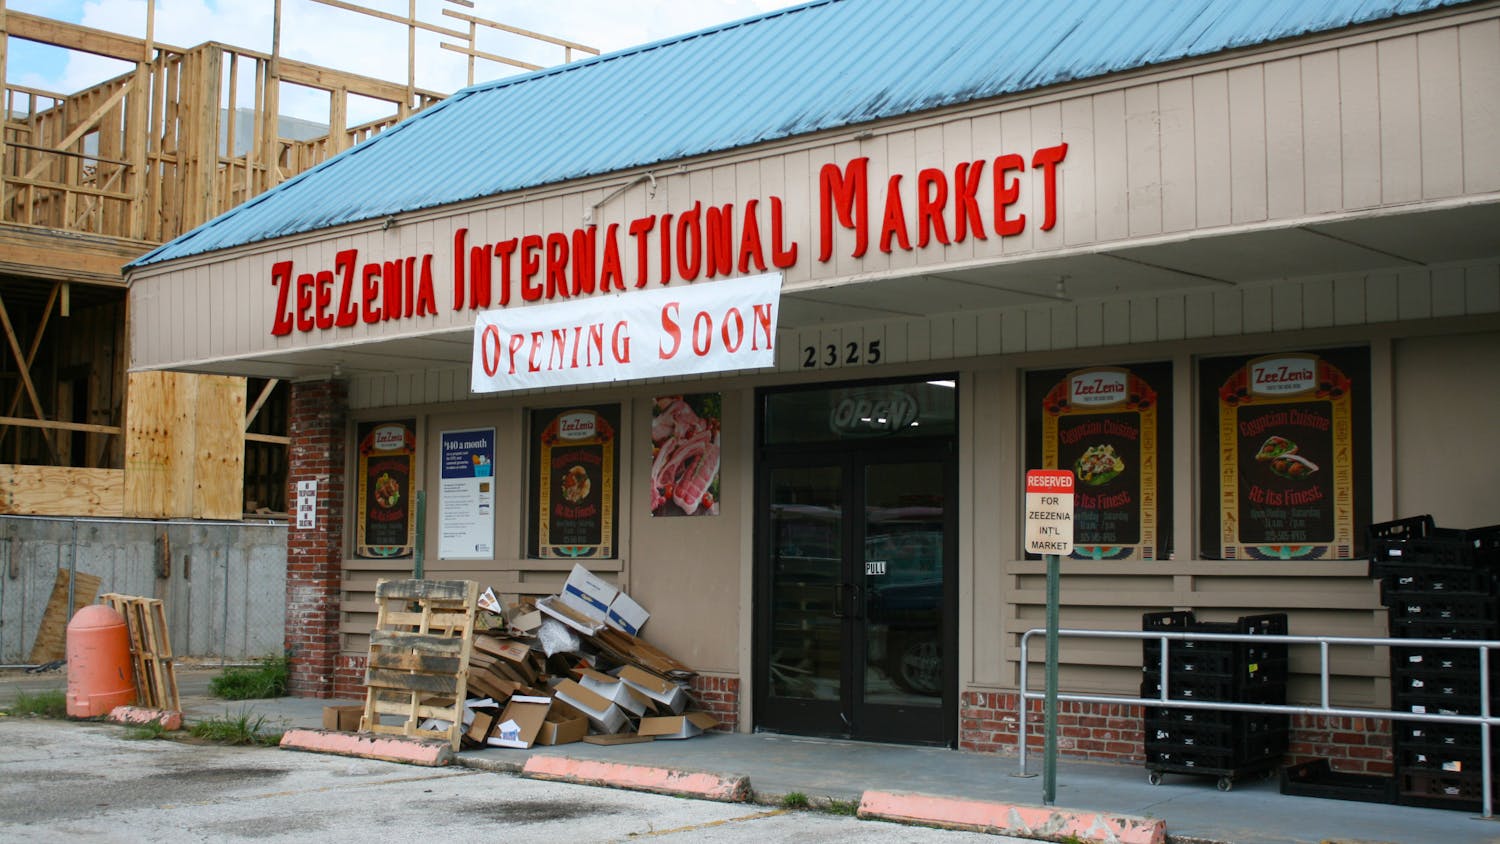 ZeeZenia International Market under construction after a fire tarnished the inside Tuesday, Sept. 13, 2022. It is set to reopen on Friday, Sept. 23, 2022.